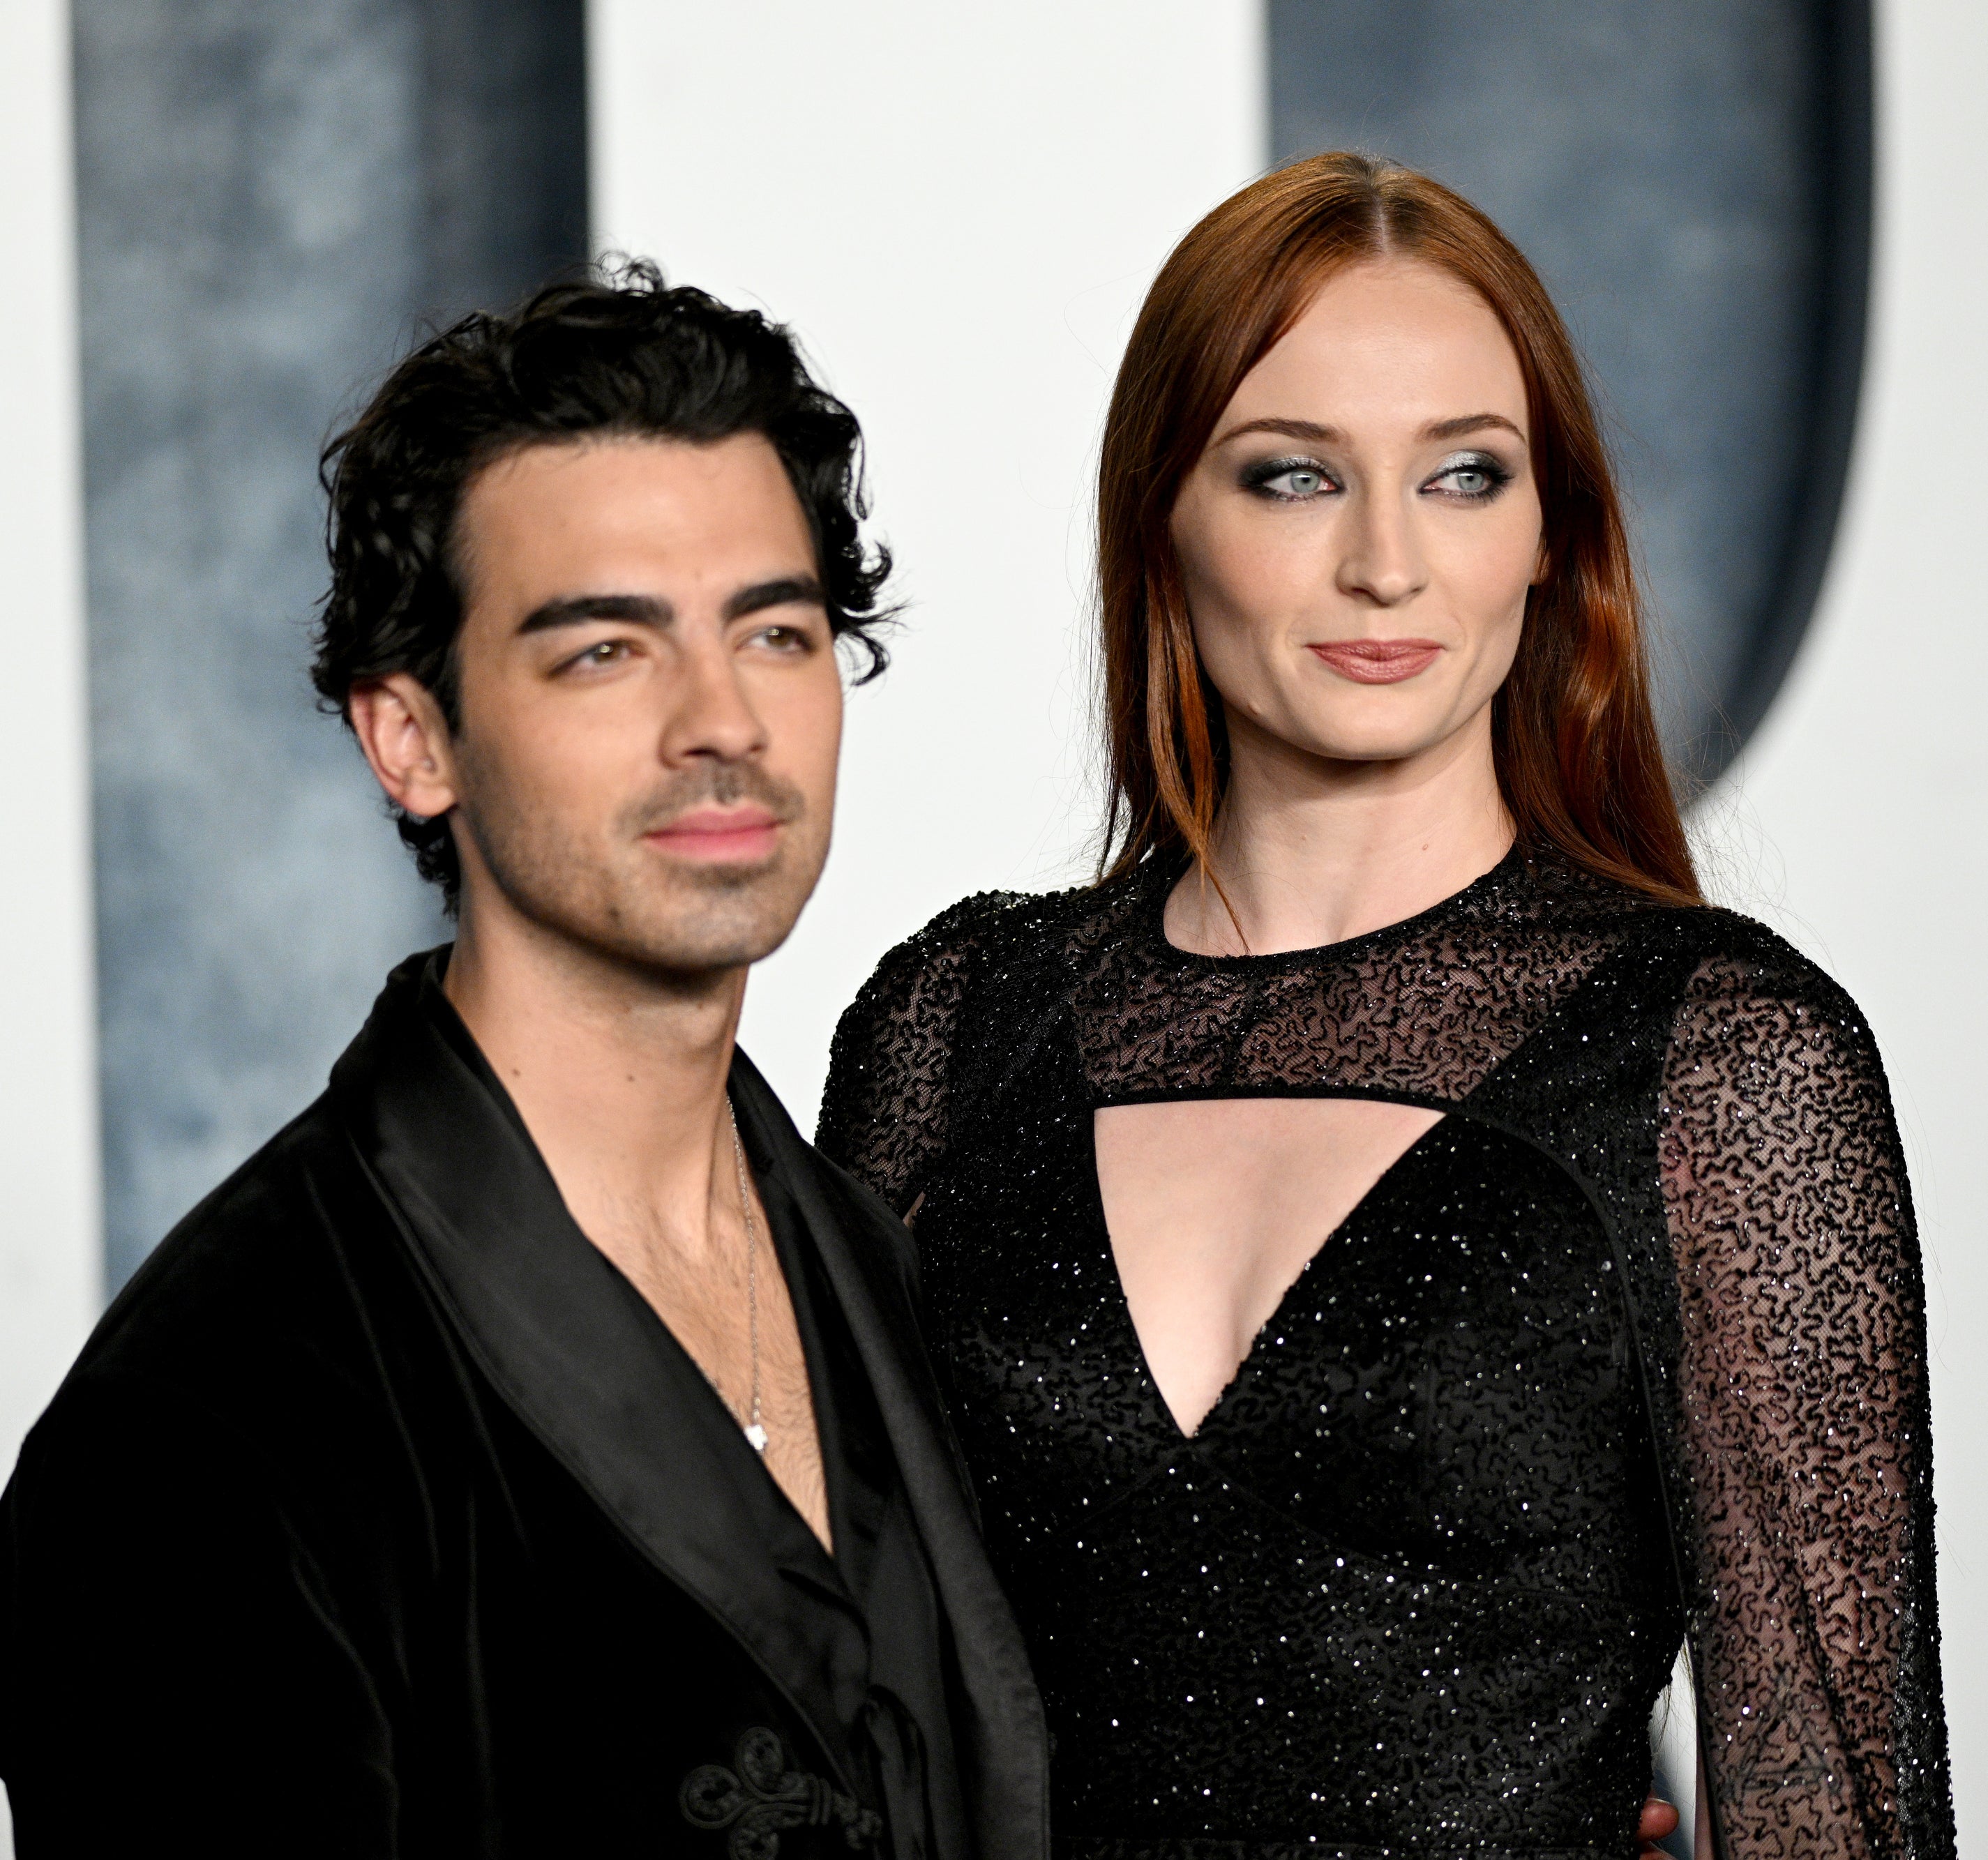 Joe and Sophie posing for photographers on the red carpet